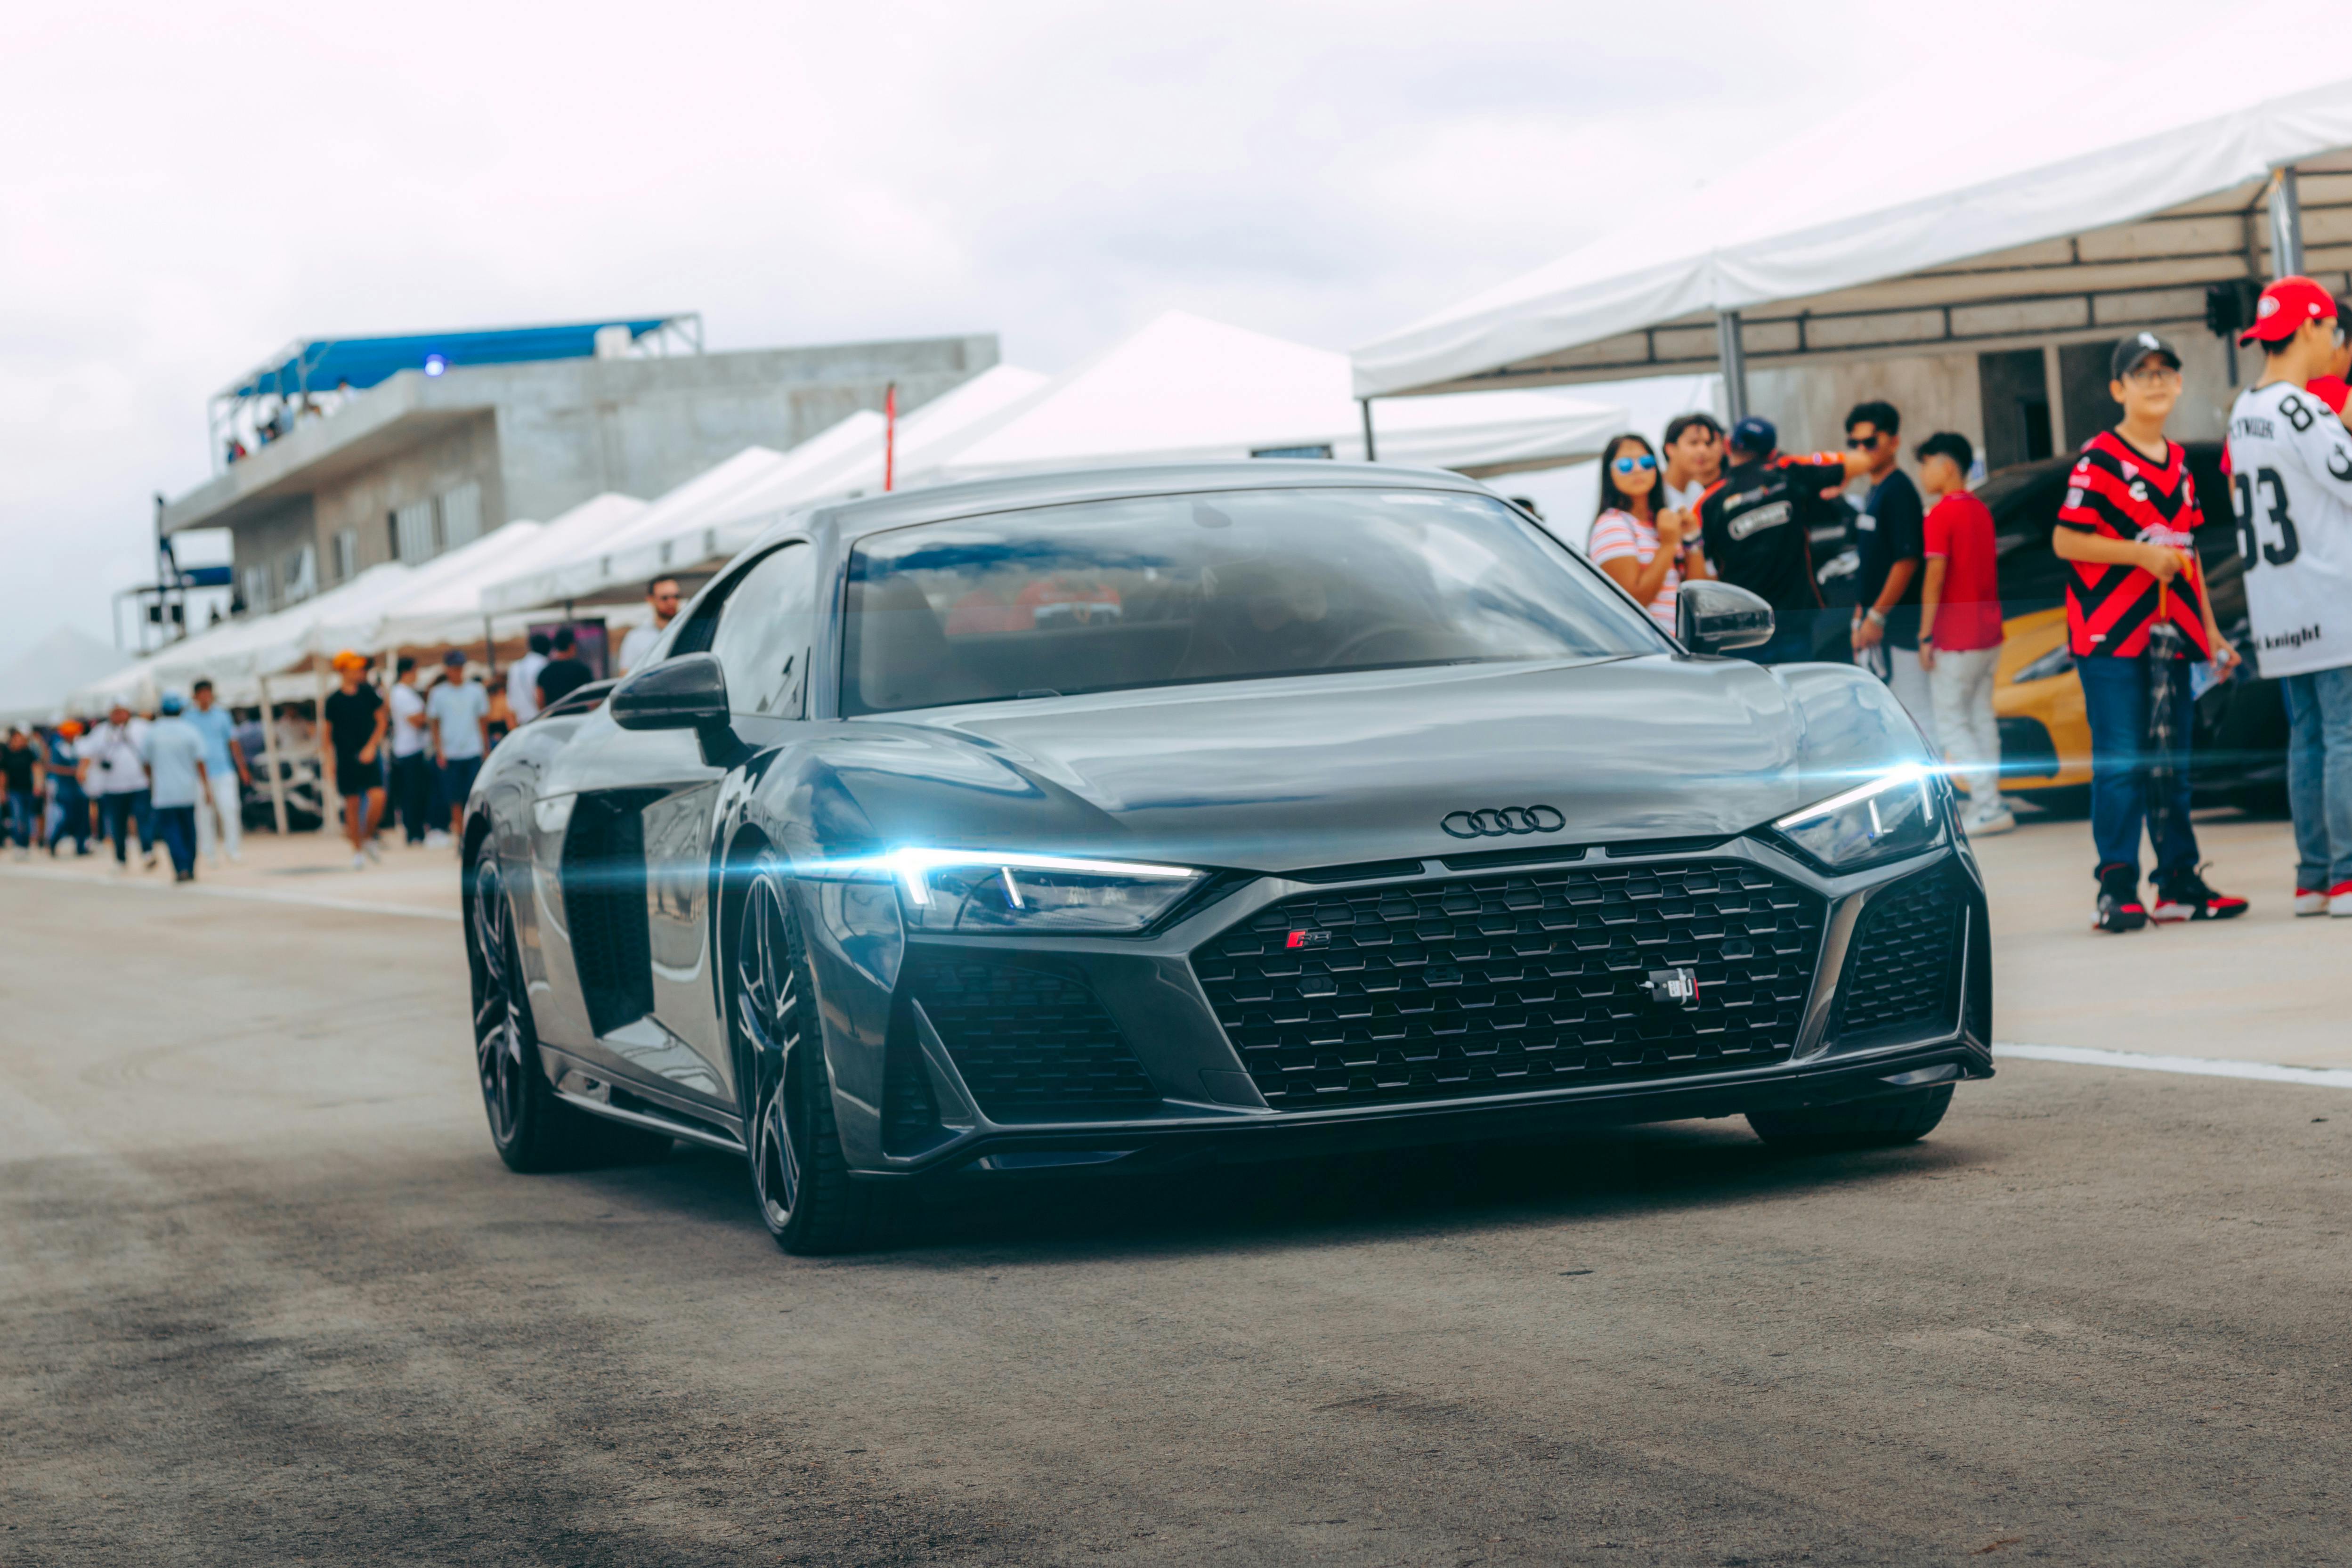 Audi R8 on a Track · Free Stock Photo